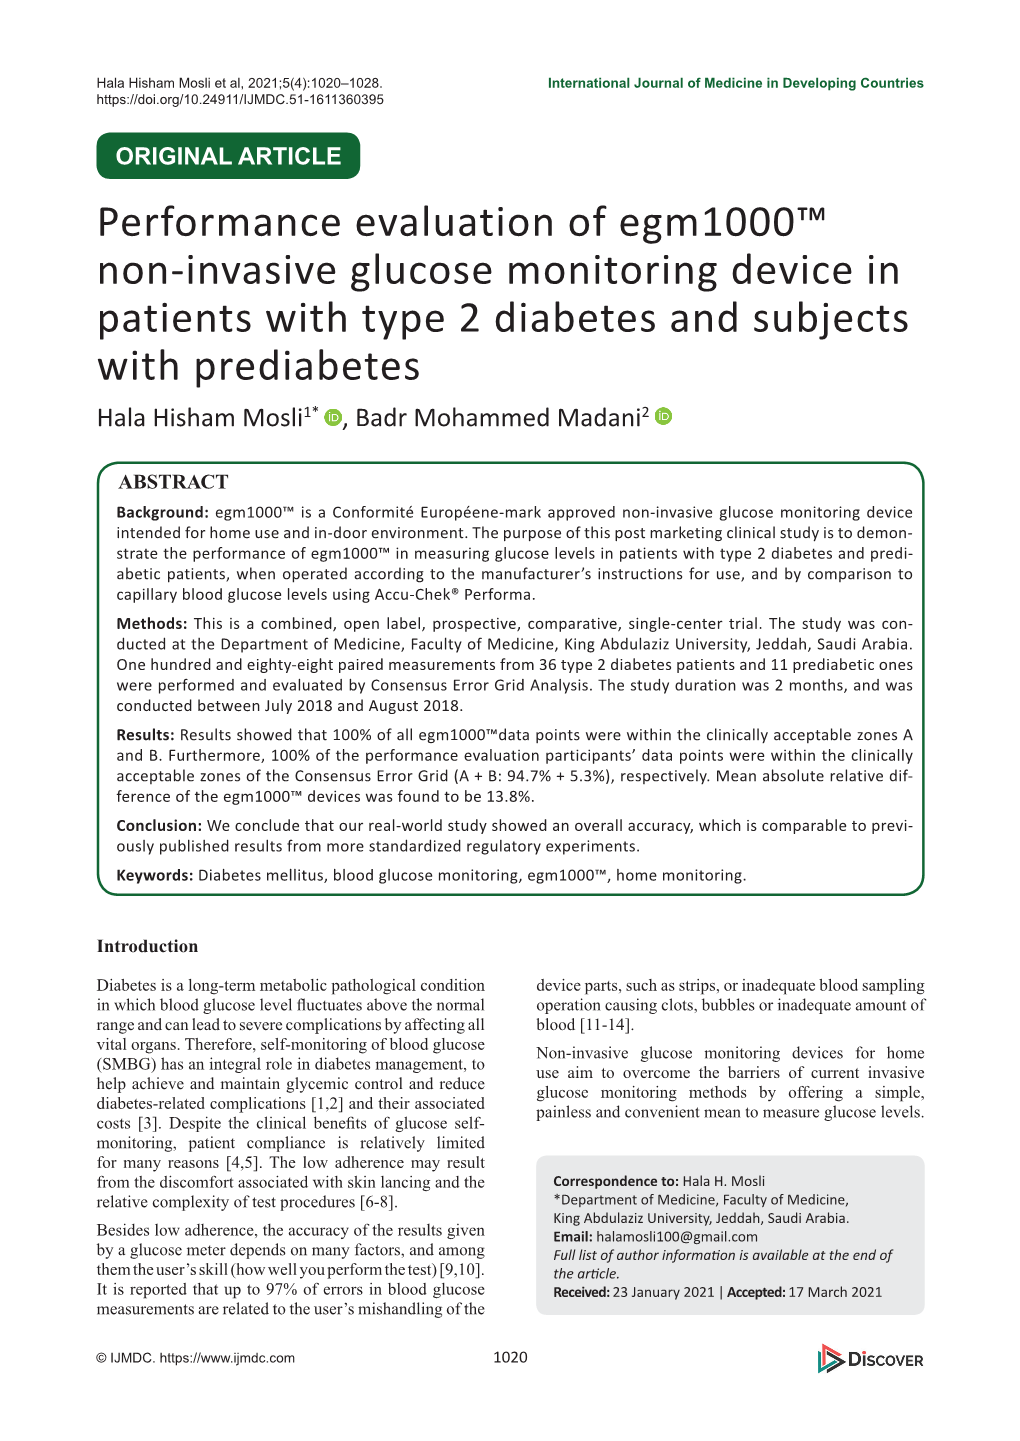 Performance Evaluation of Egm1000™ Non-Invasive Glucose Monitoring Device in Patients with Type 2 Diabetes and Subjects with P